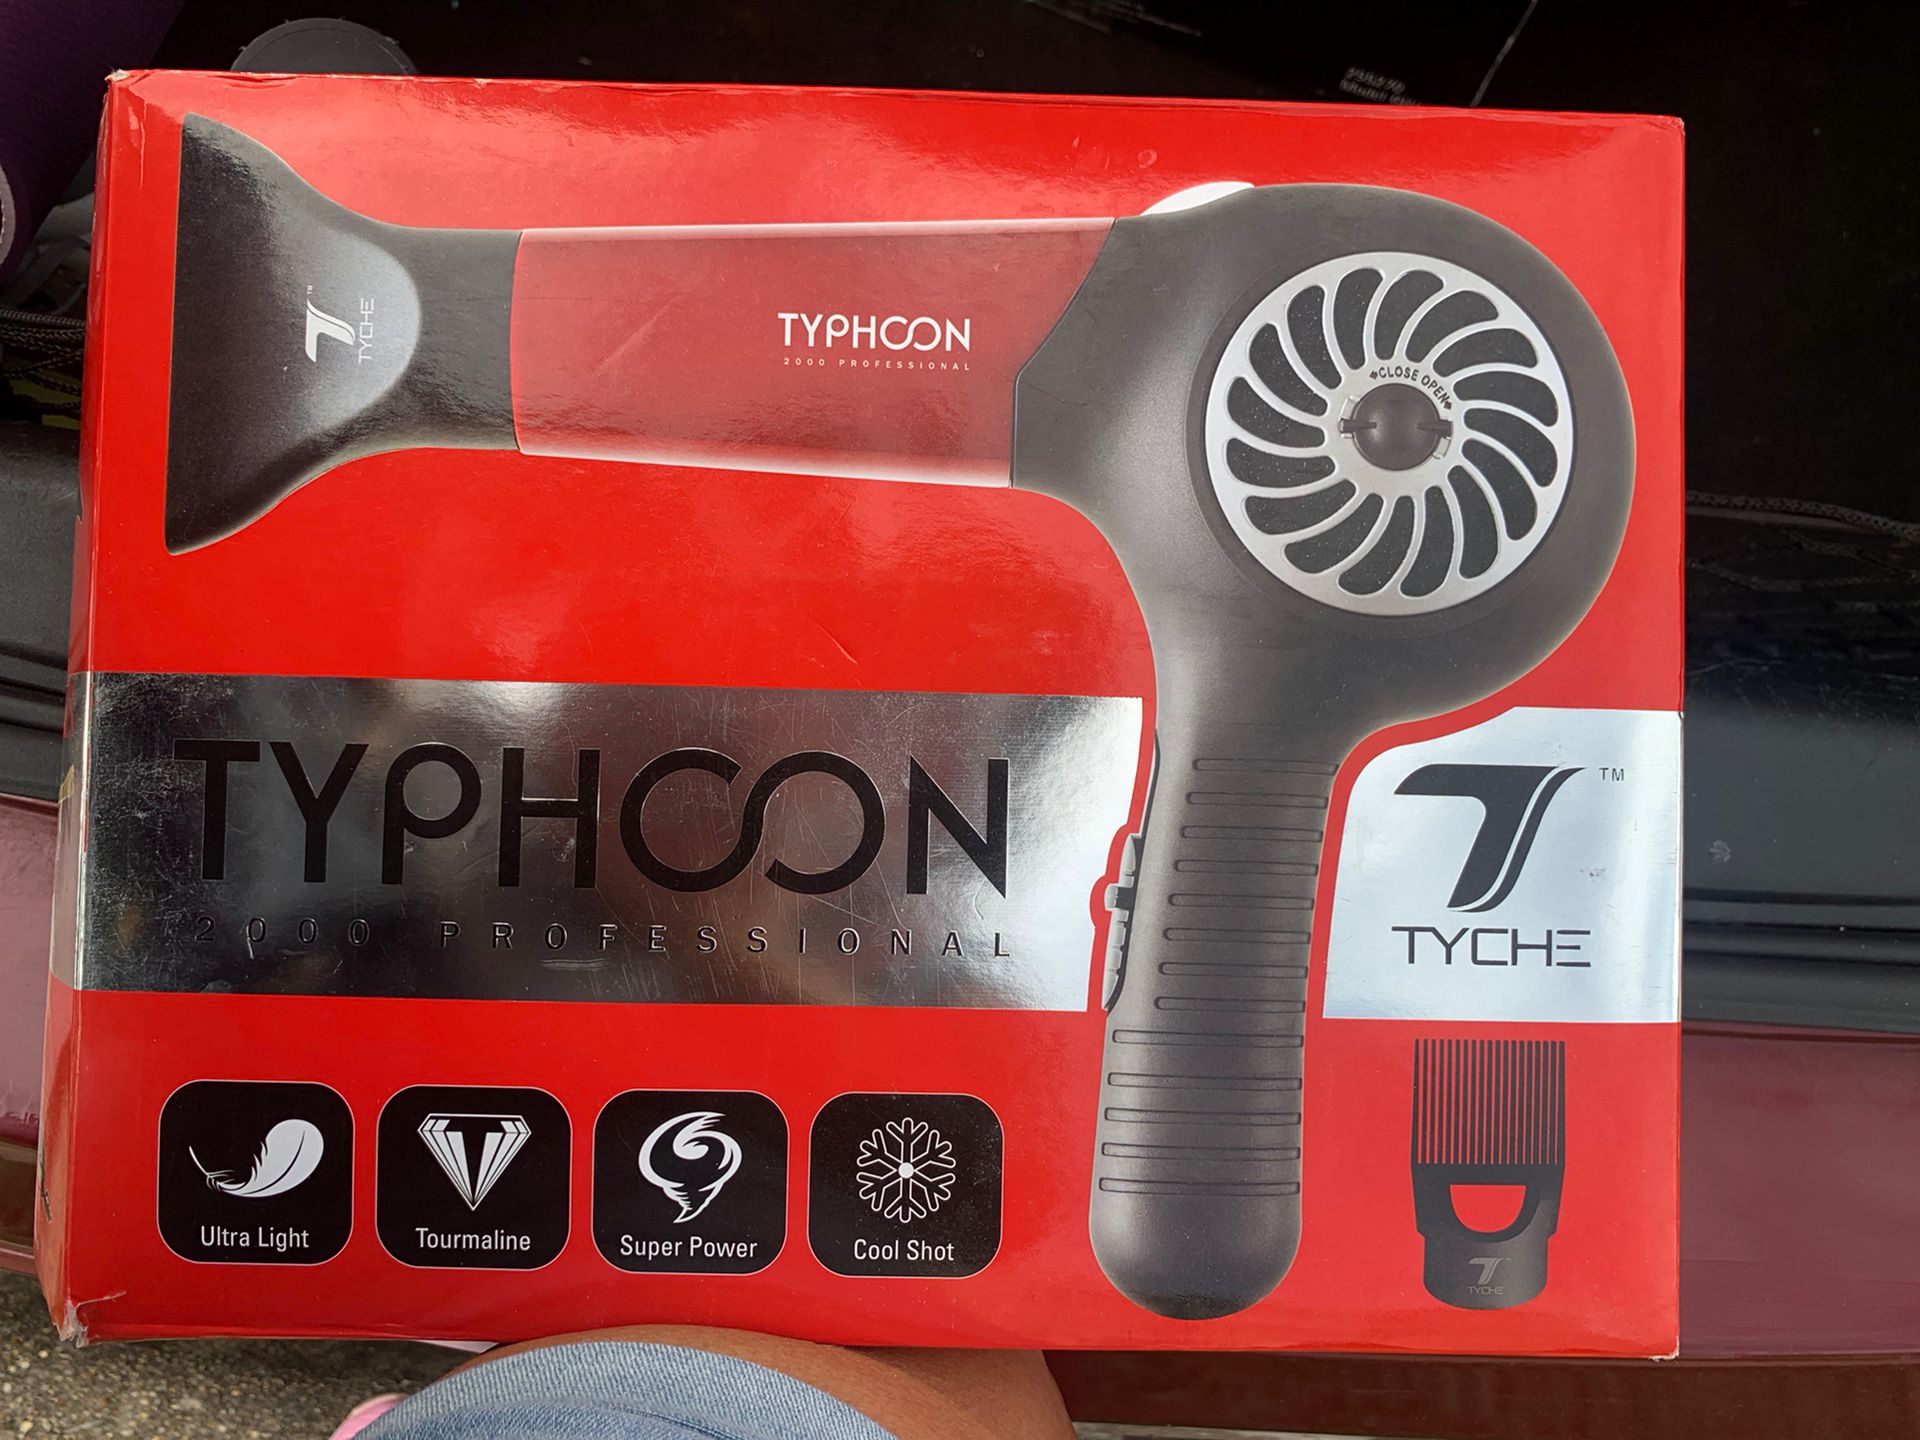 Typhoon 2000 Professional Tourmaline Hair Dryer By Tyche 